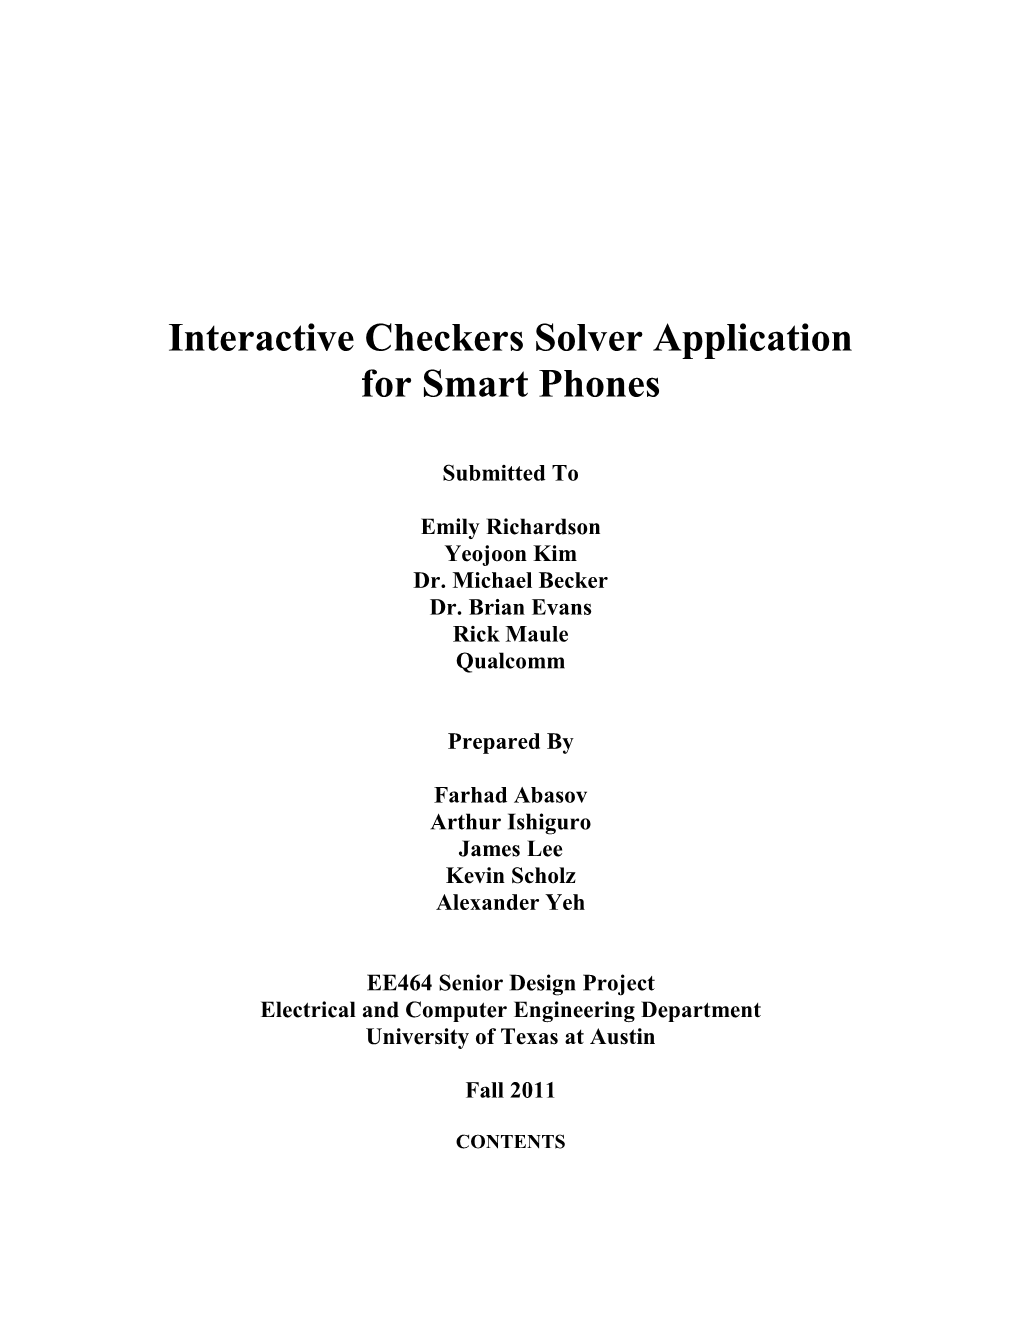 Interactive Checkers Solver Application for Smart Phones